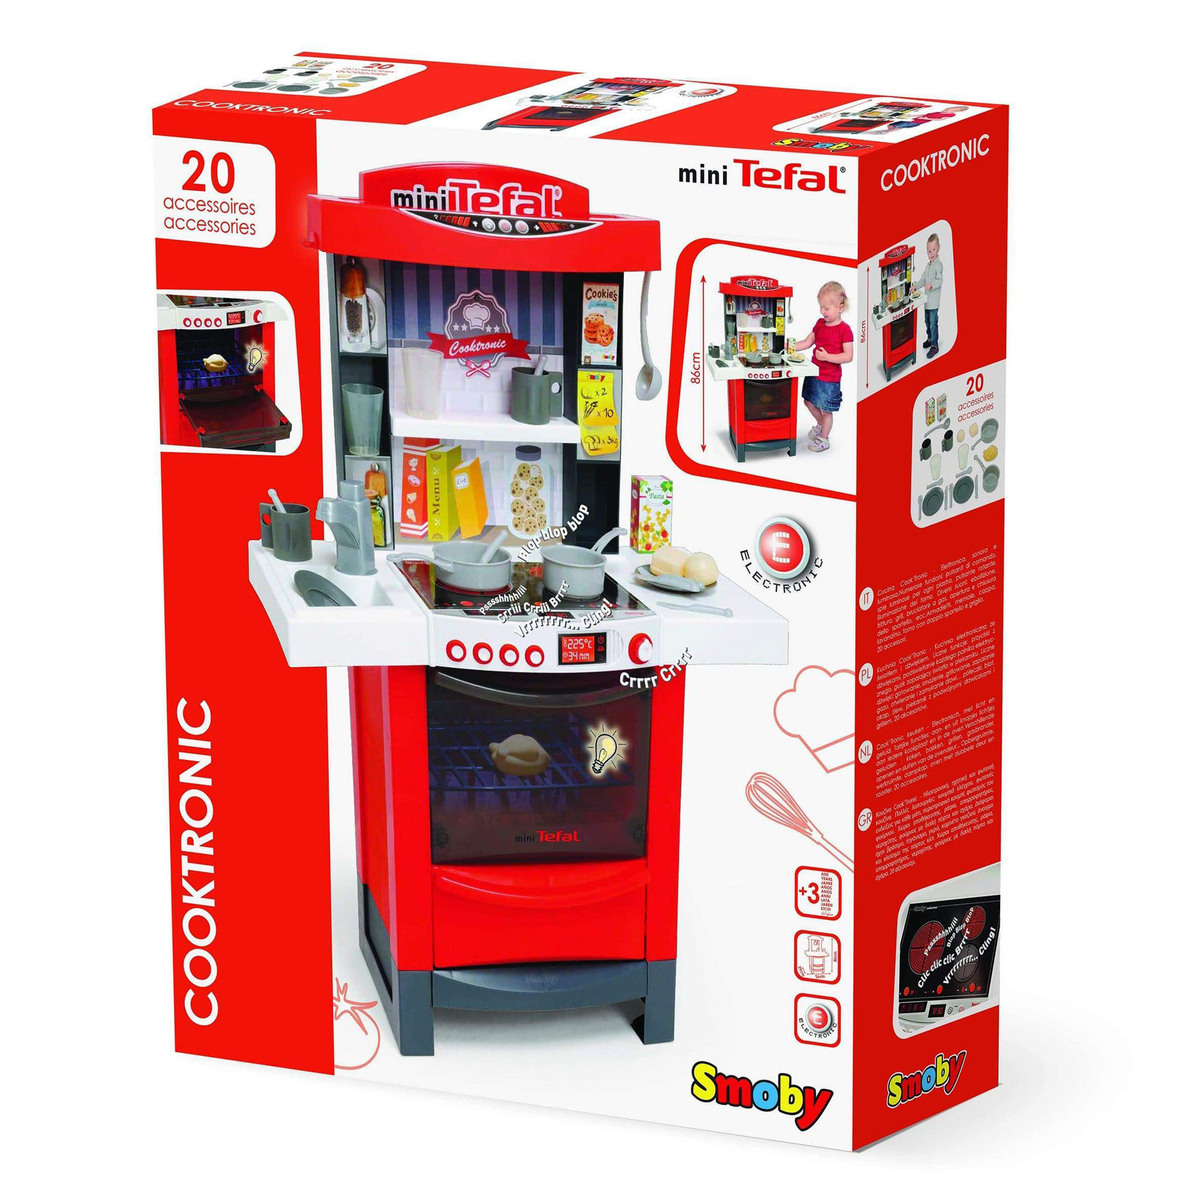 Smoby Tefal Cooktronic Kitchen Toy Kit